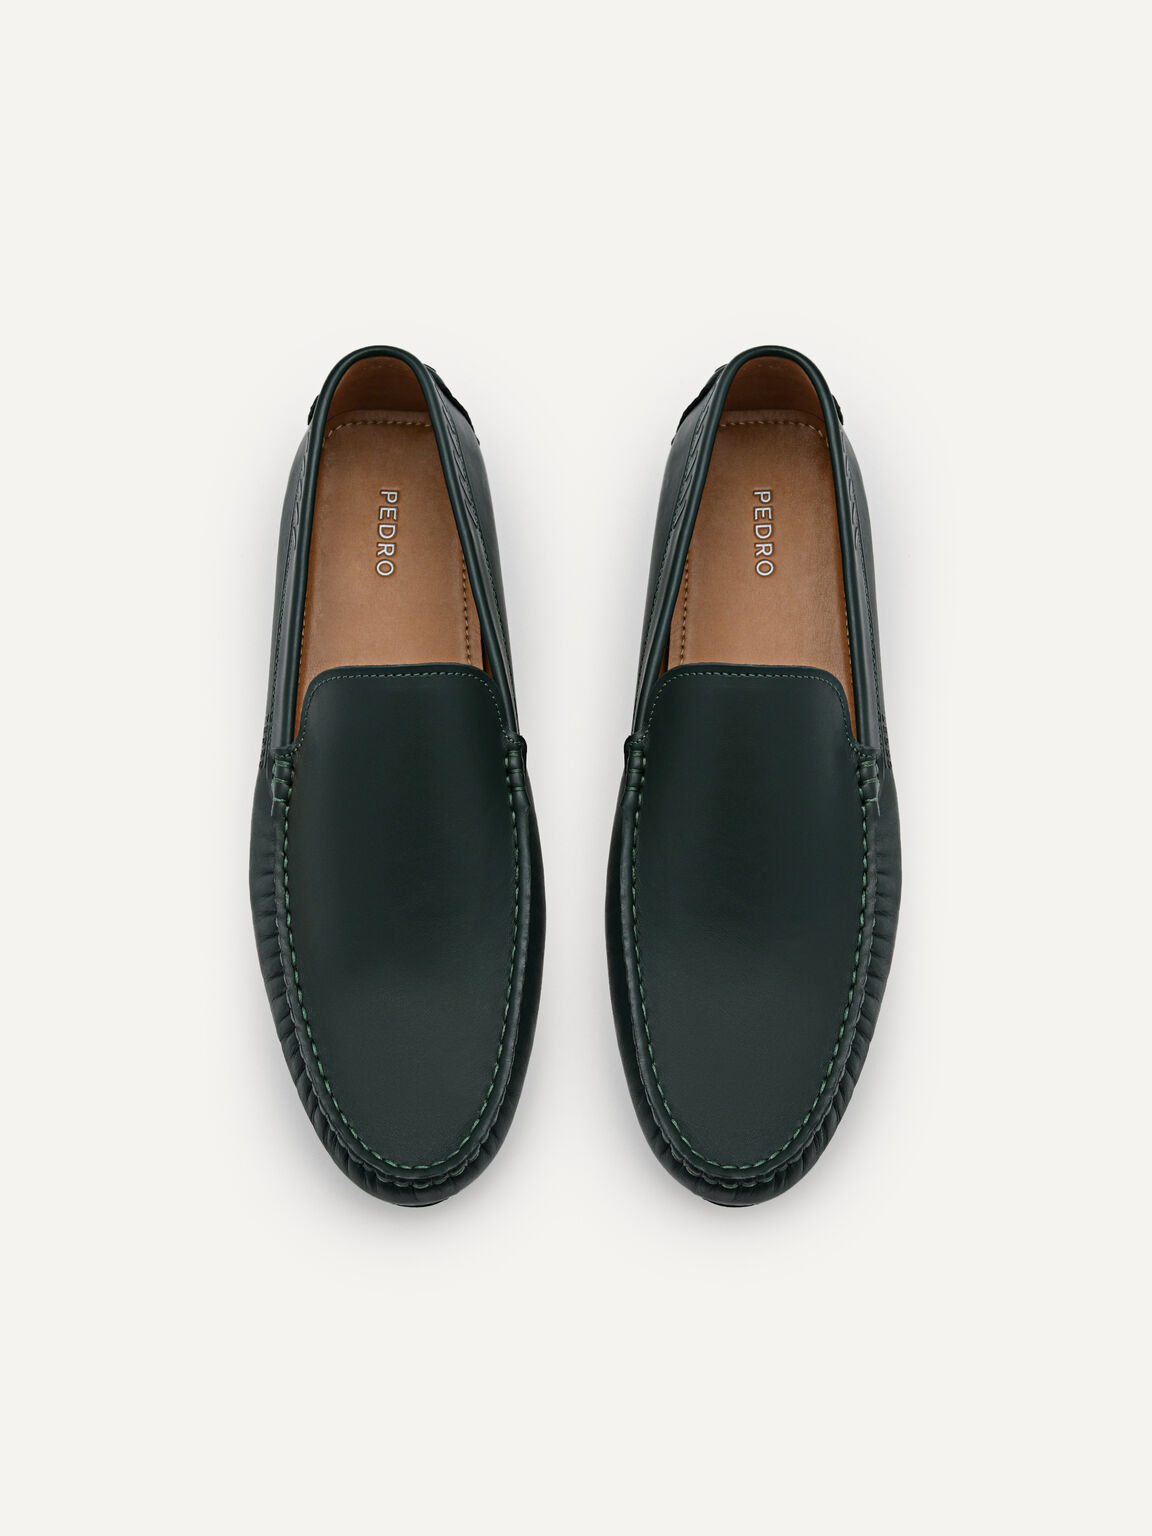 Leather Driving Shoes, Dark Green, hi-res